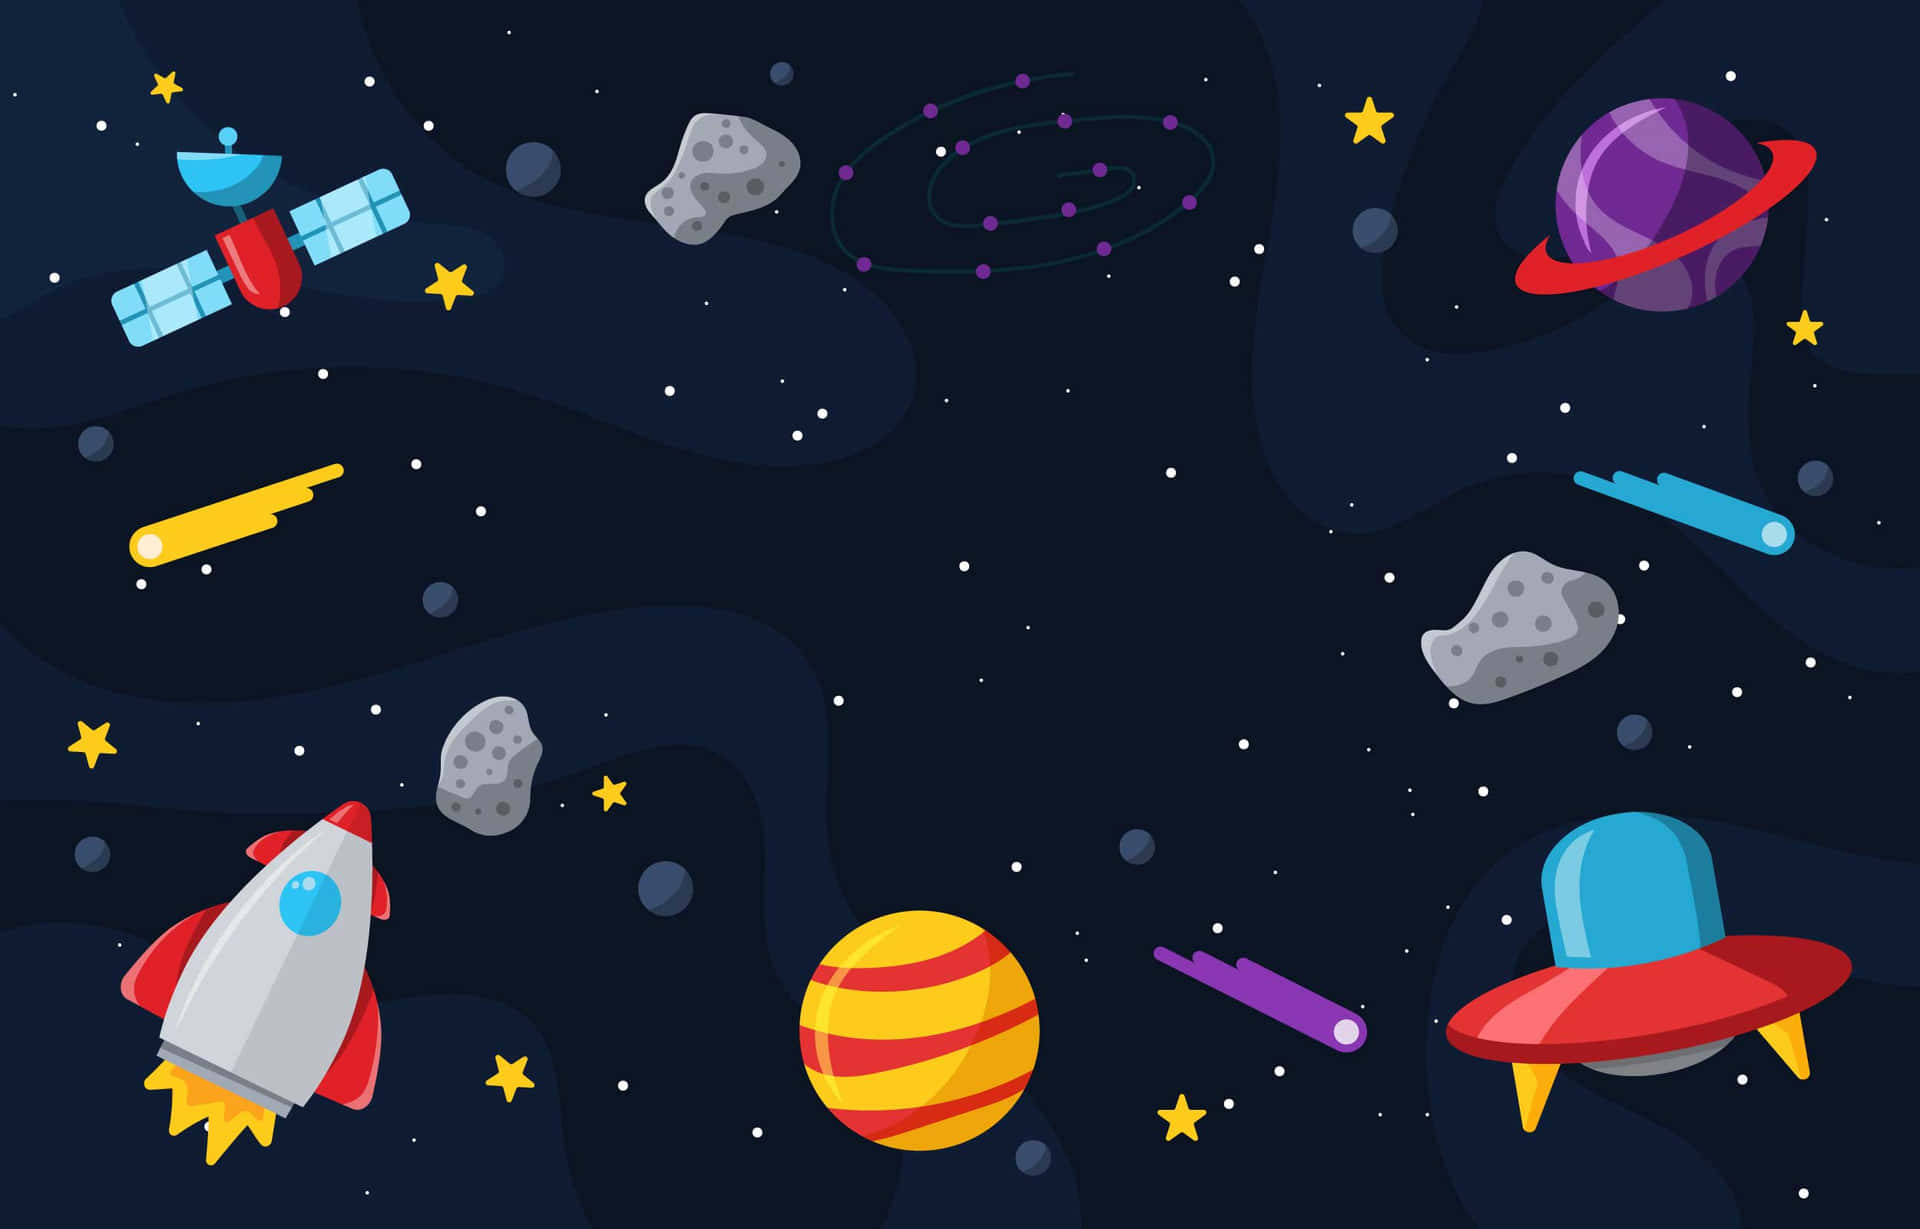 Download Animated Space Wallpaper 